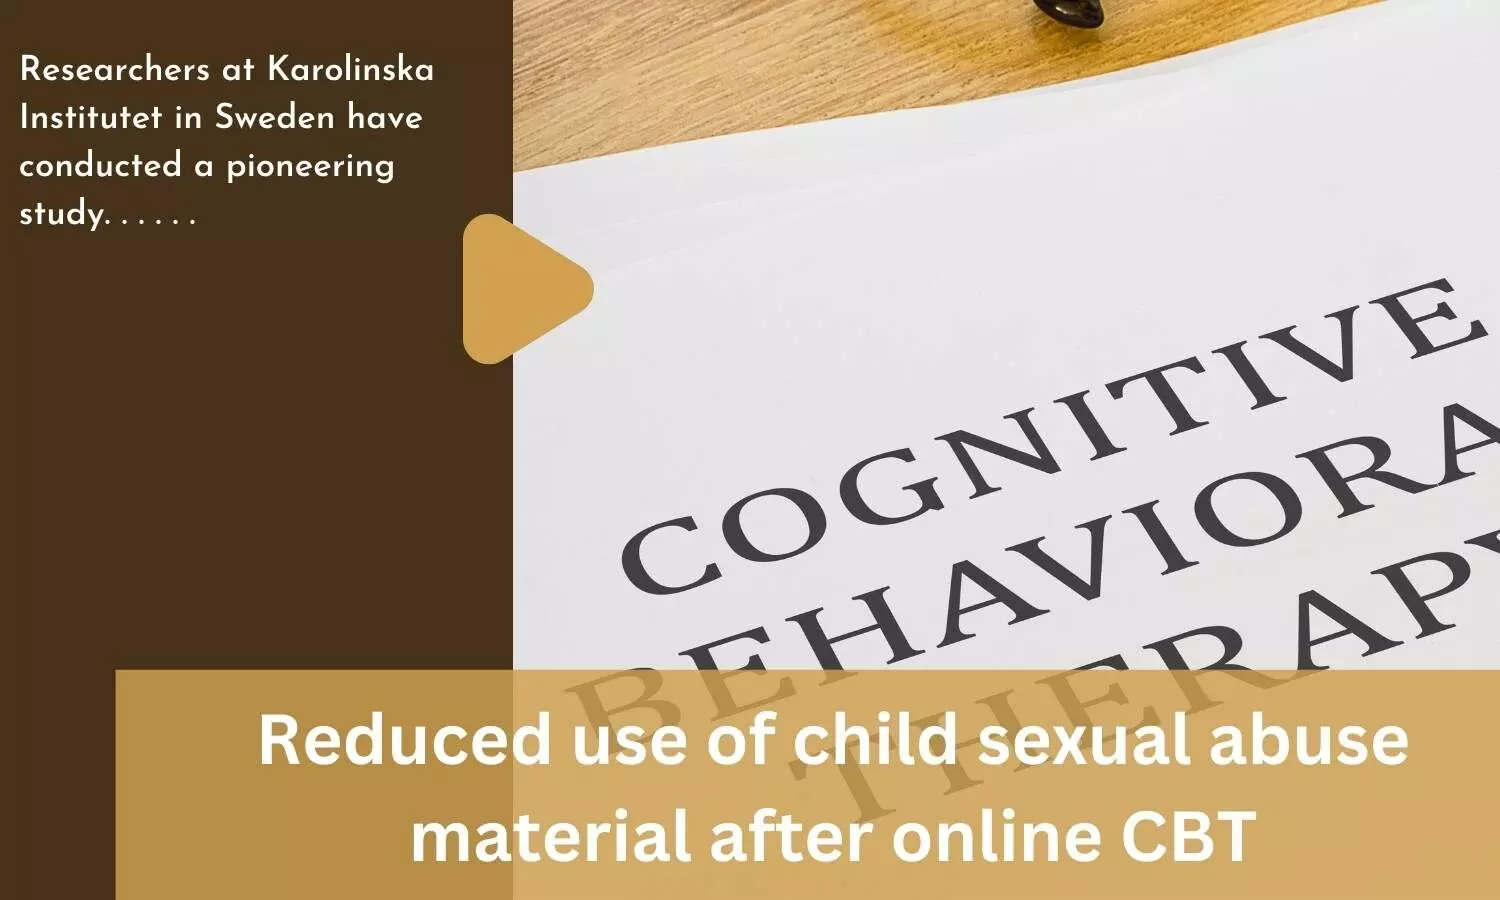 Reduced use of child sexual abuse material after online CBT